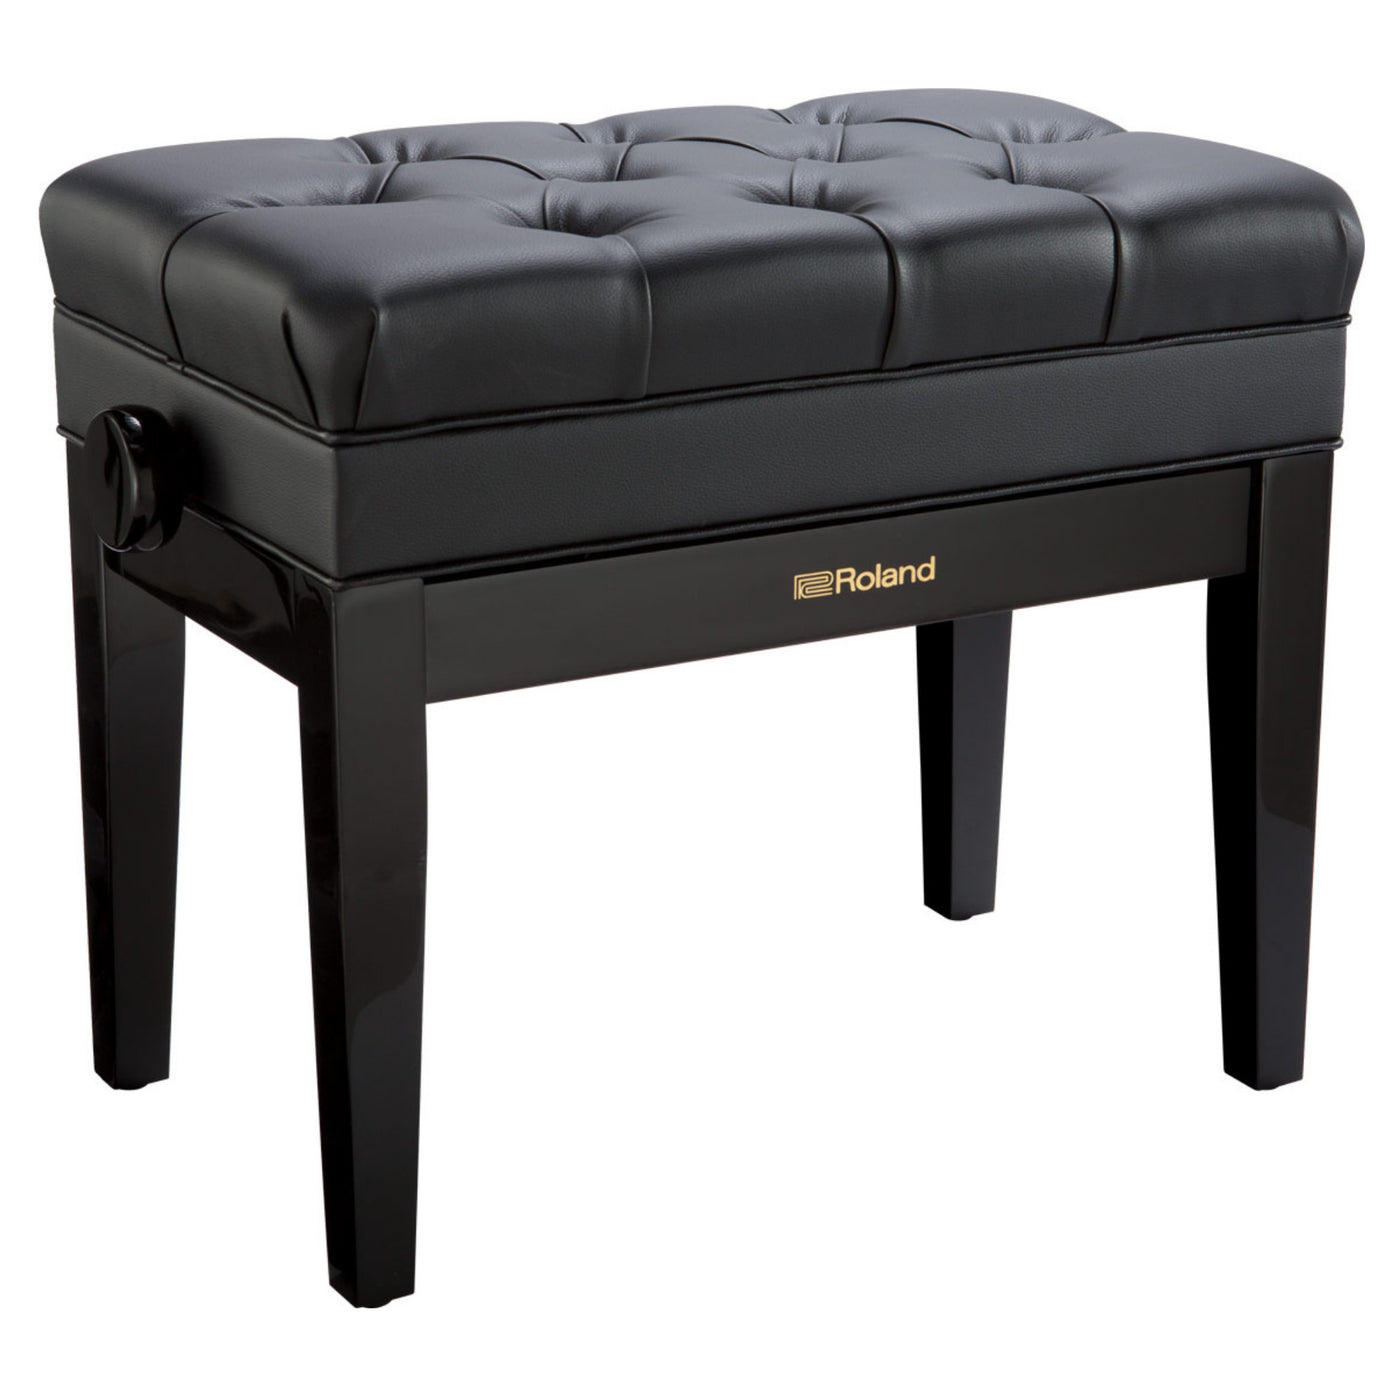 Roland Piano Bench with Vinyl Seat and Music Compartment - Polished Ebony